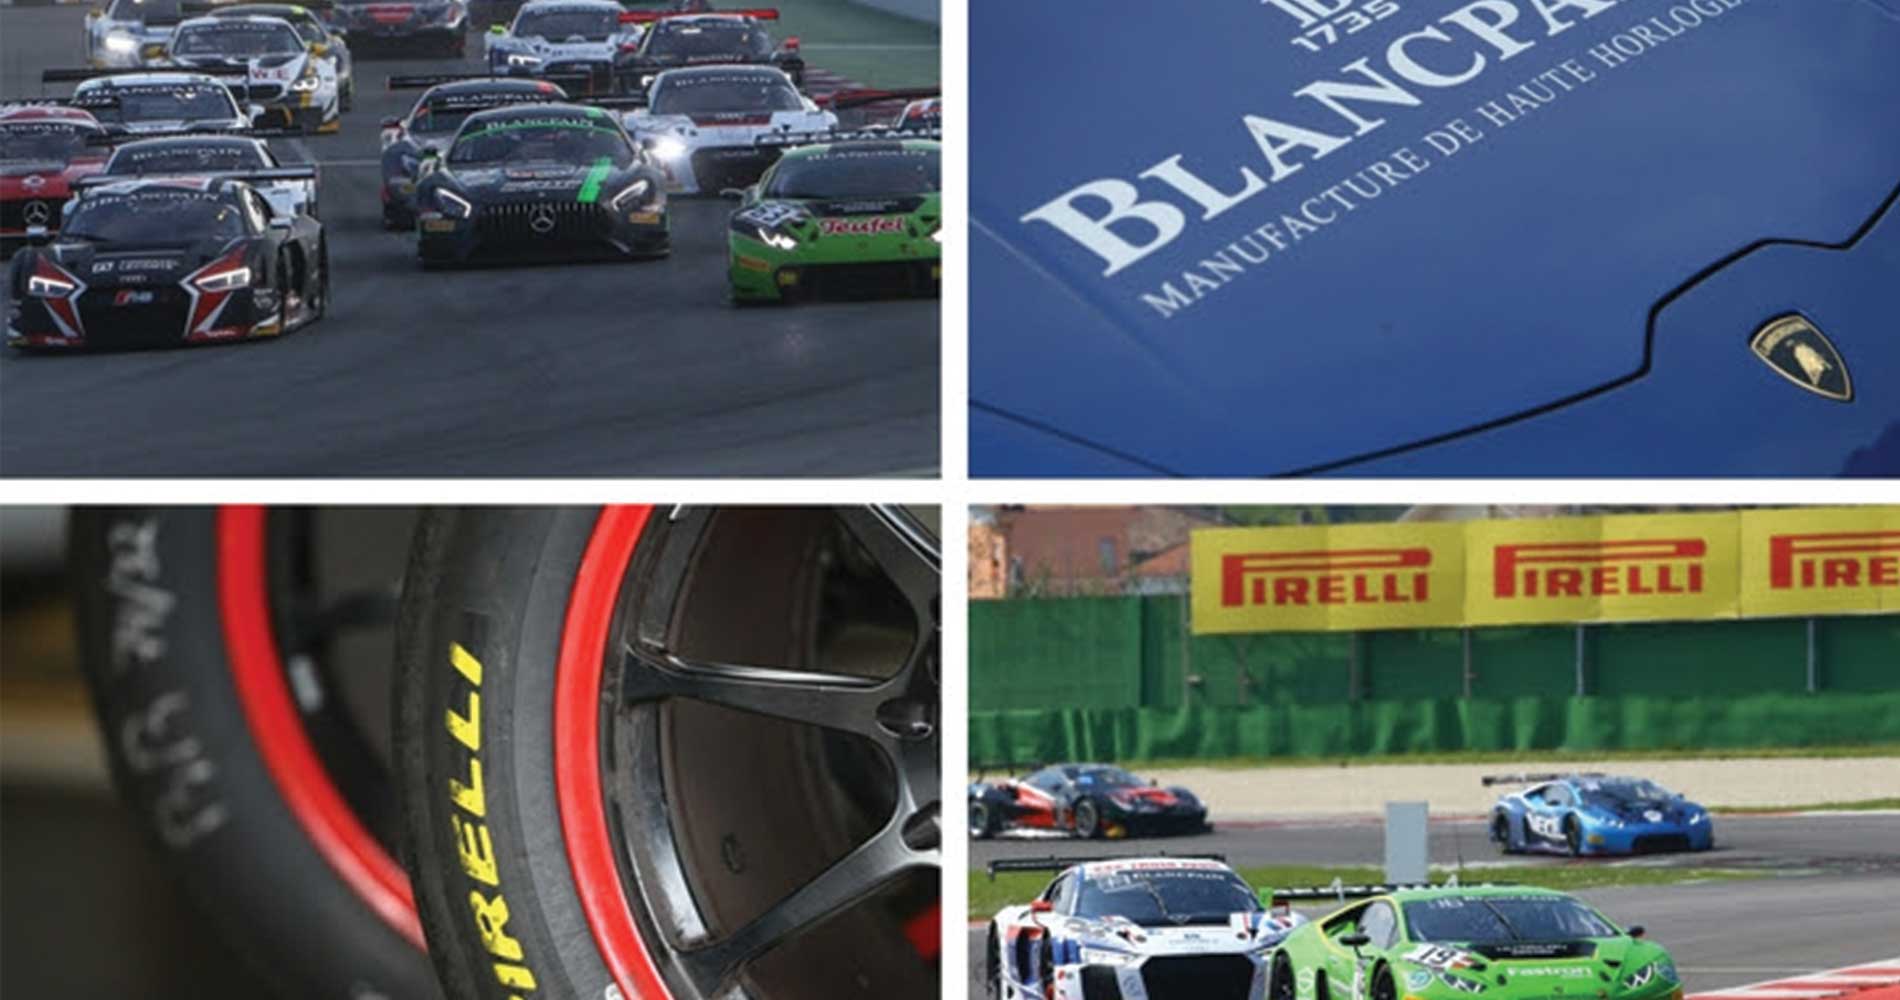 blancpain-gt-series-asia-reveals-inaugural-calendar-and-championship-details-motorsportdays-track-day-1